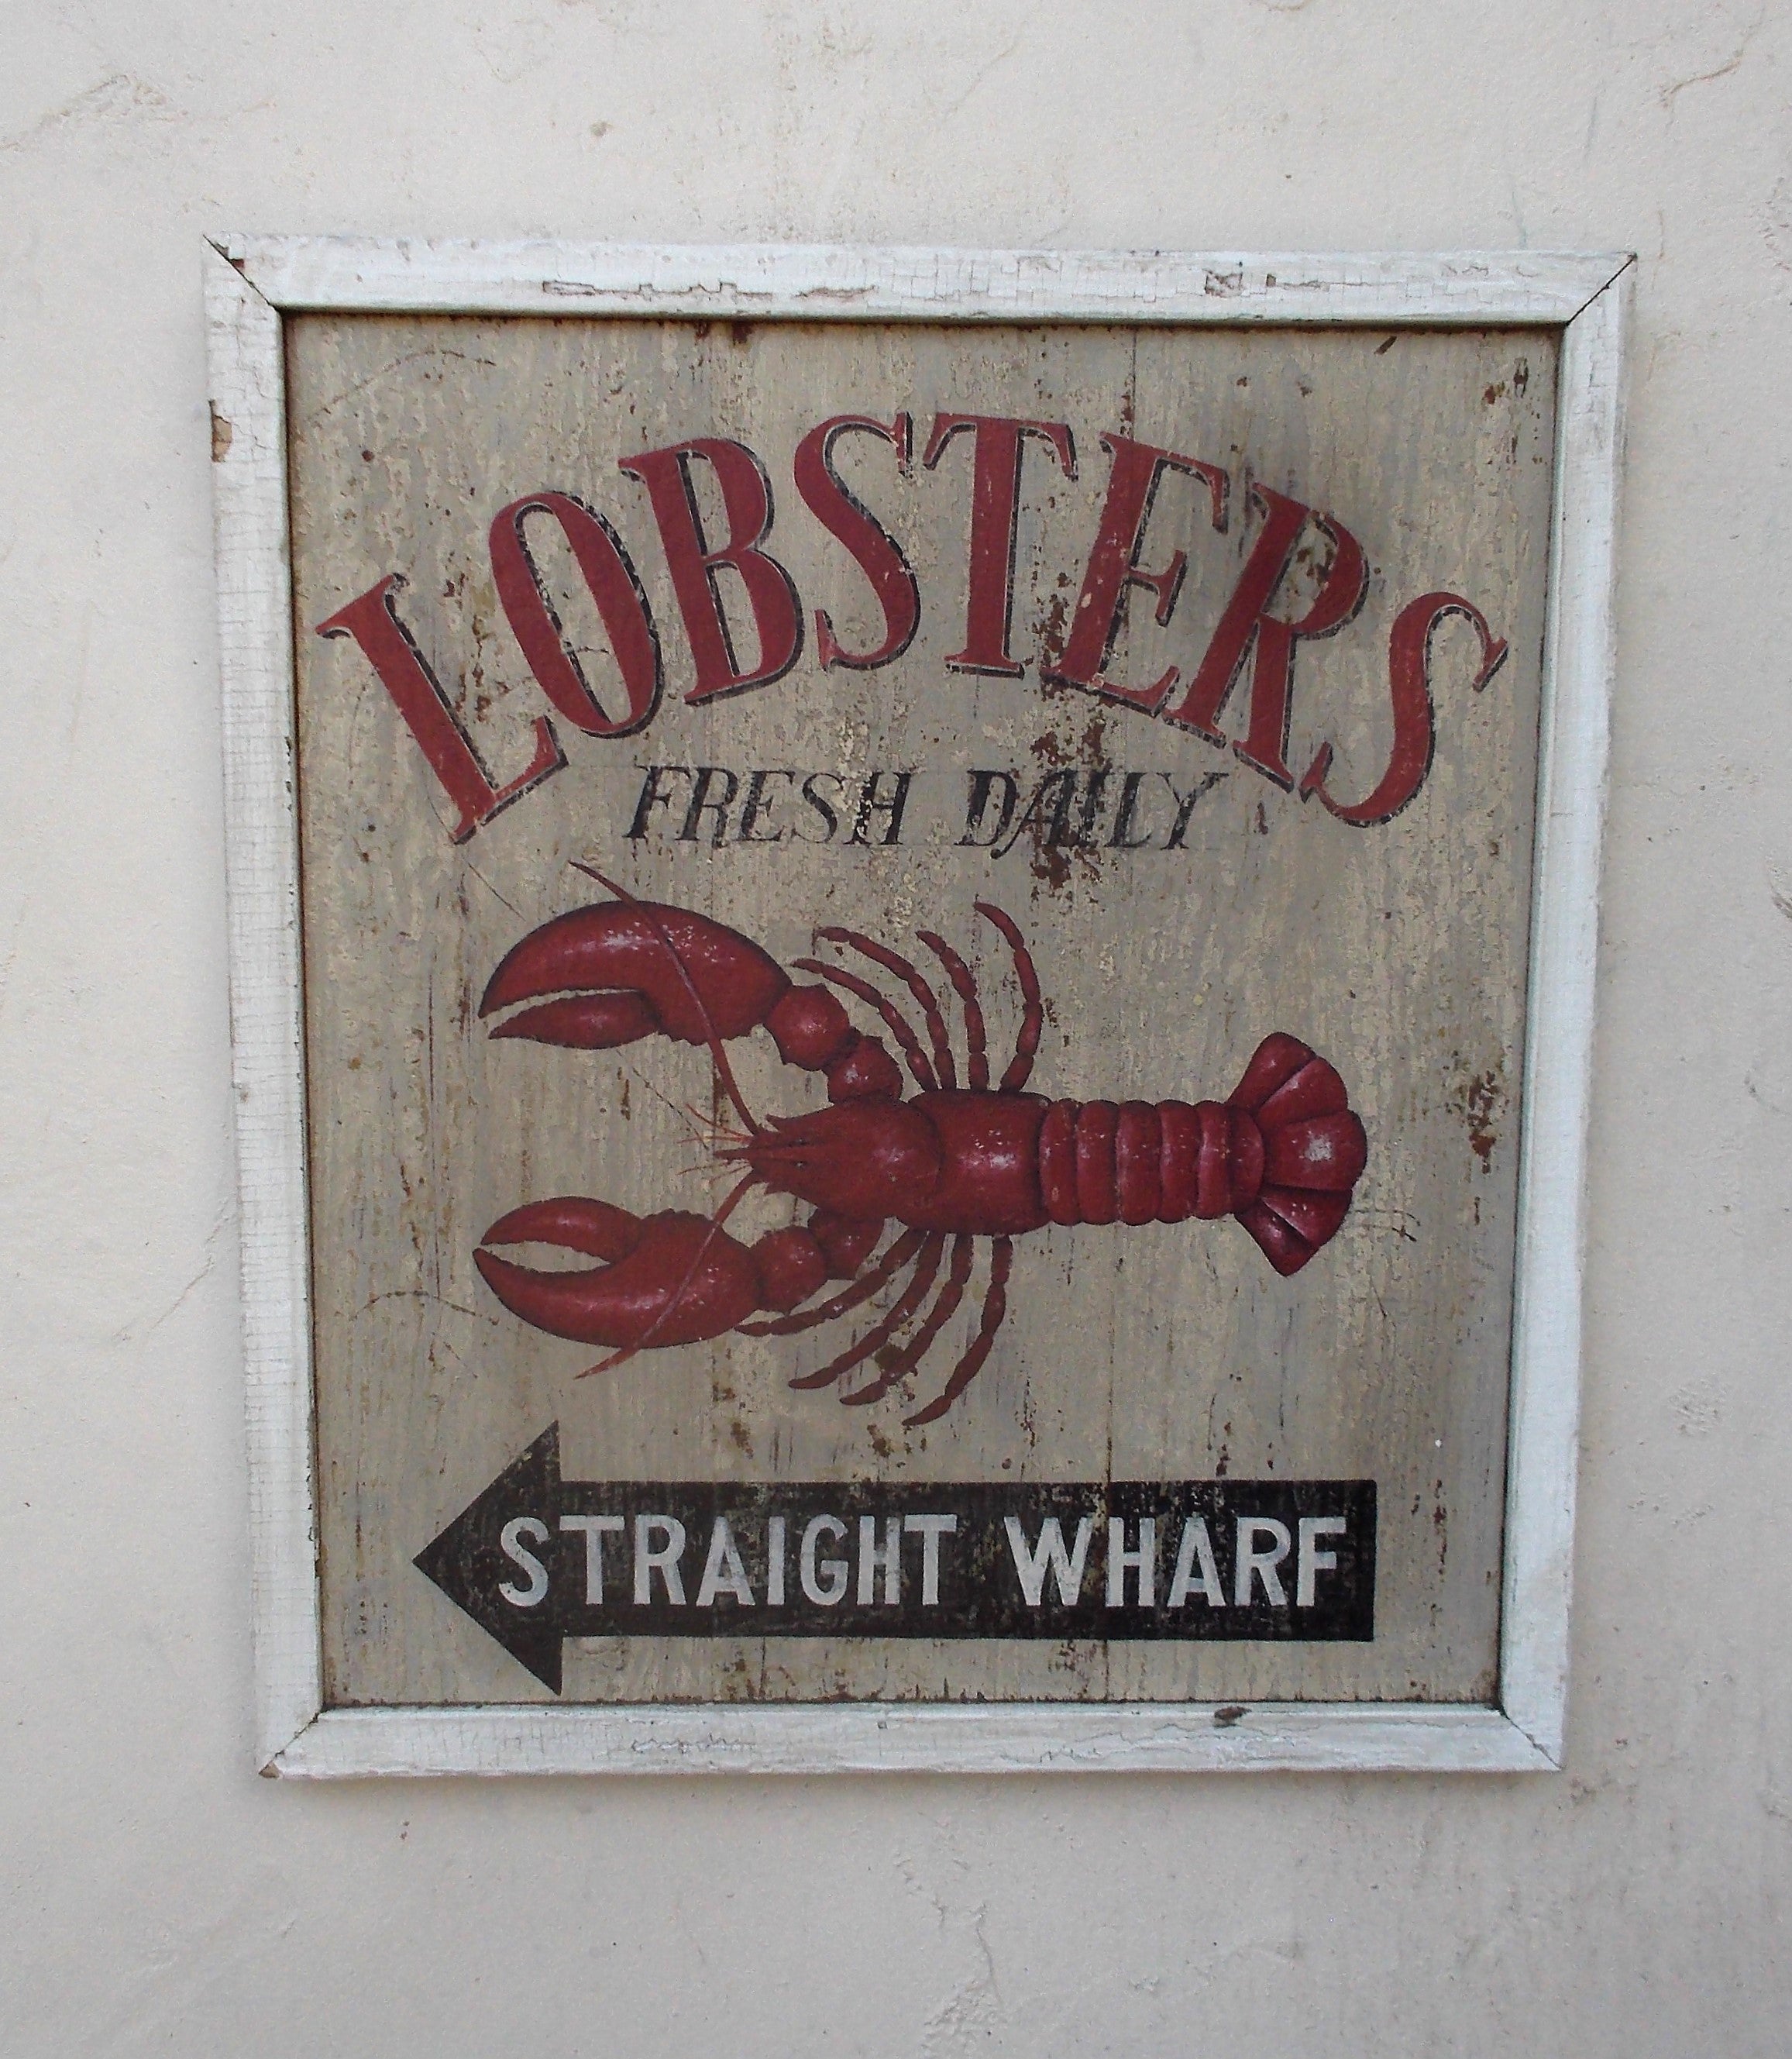 Lobsters Fresh Daily